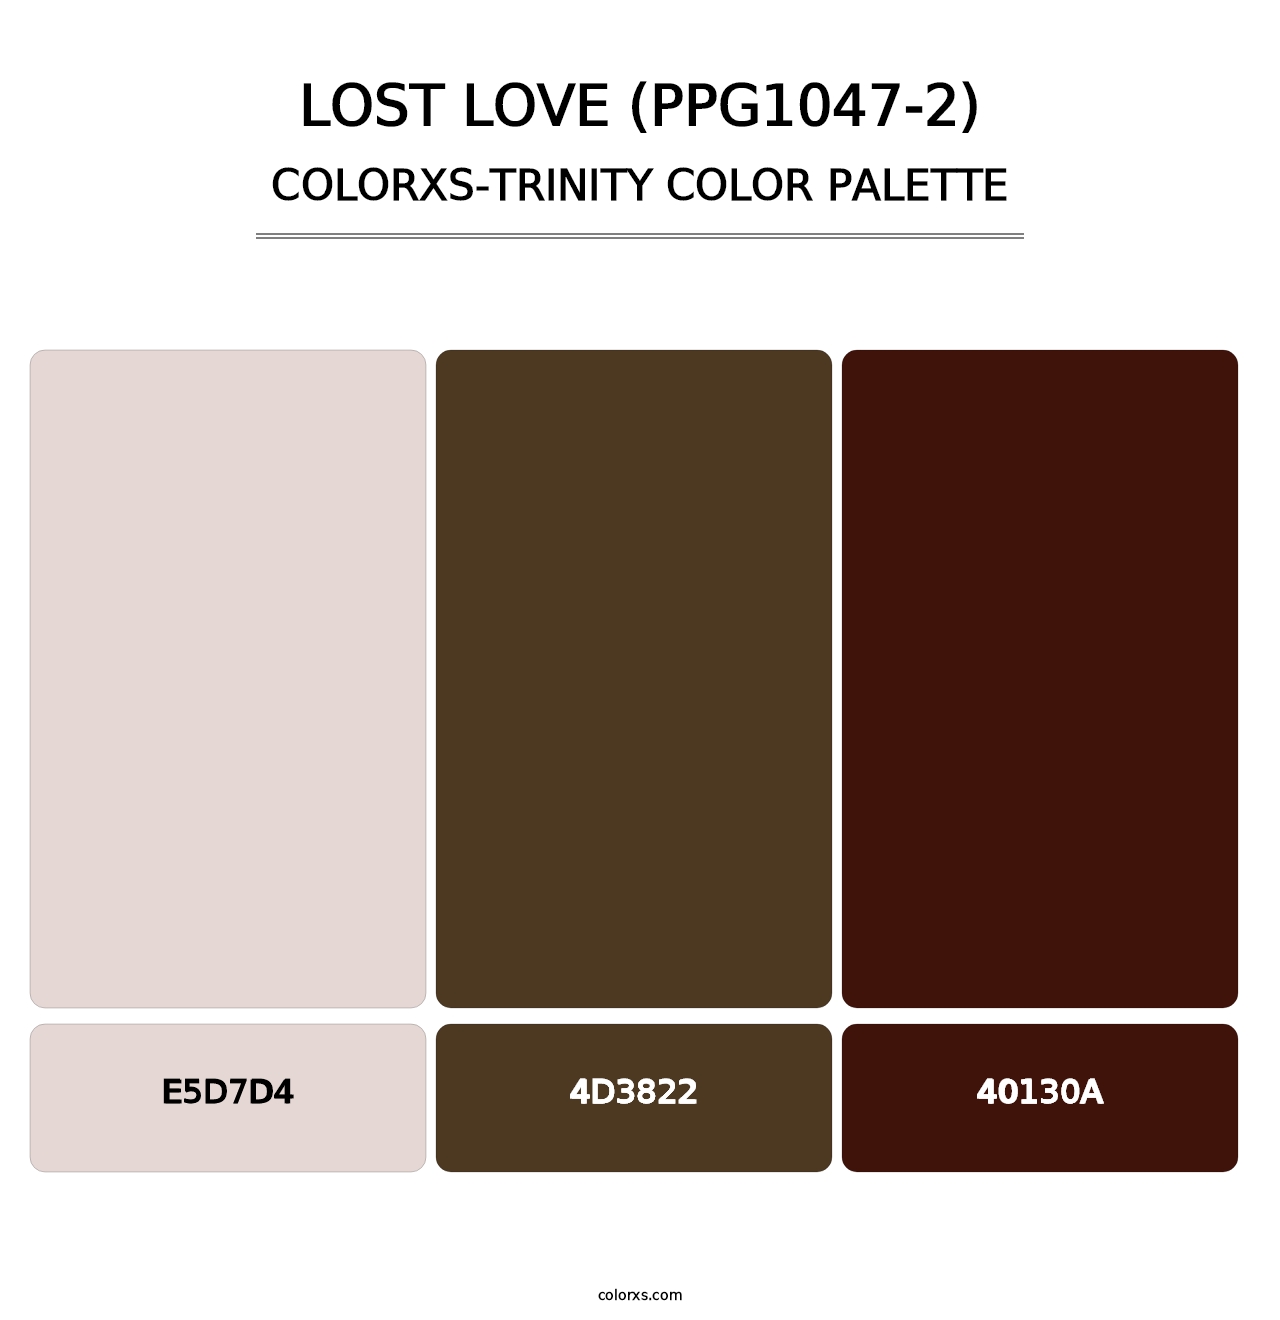 Lost Love (PPG1047-2) - Colorxs Trinity Palette